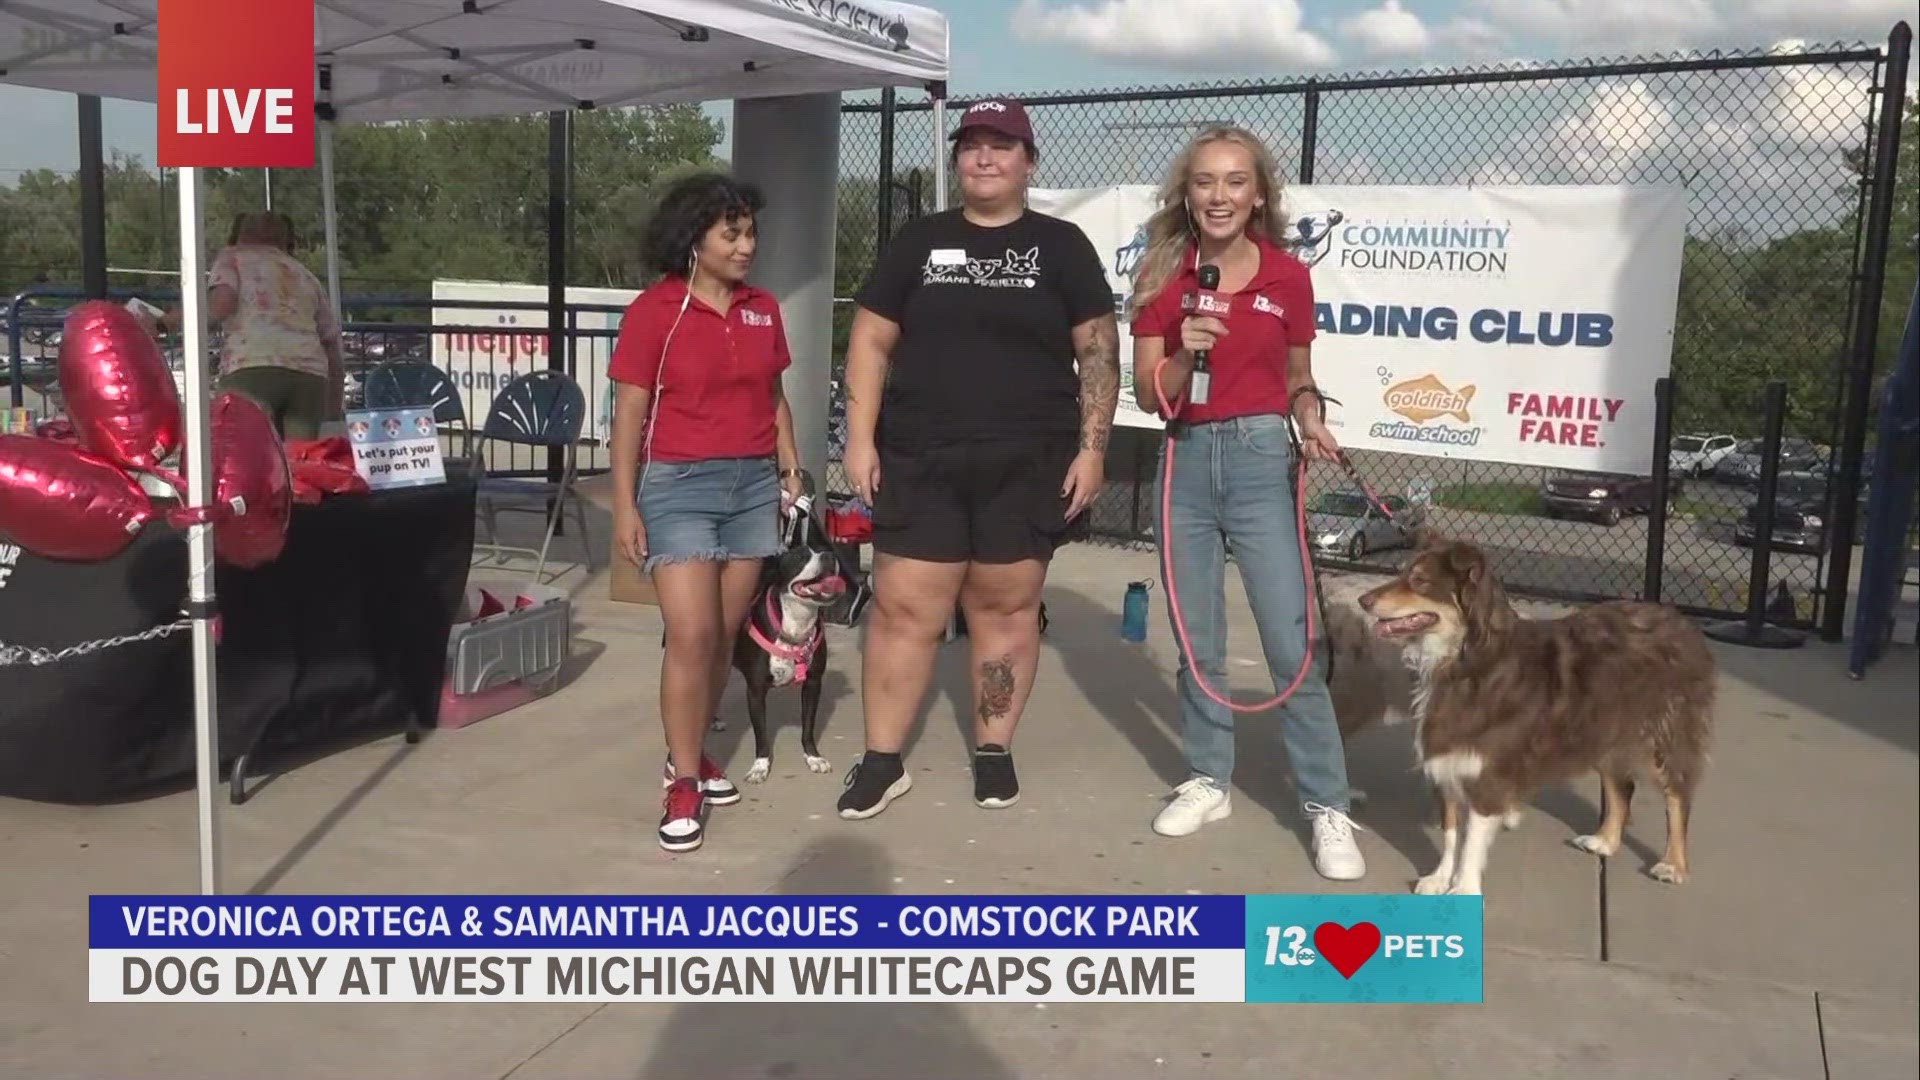 13 LOVES PETS and so do the West Michigan Whitecaps!